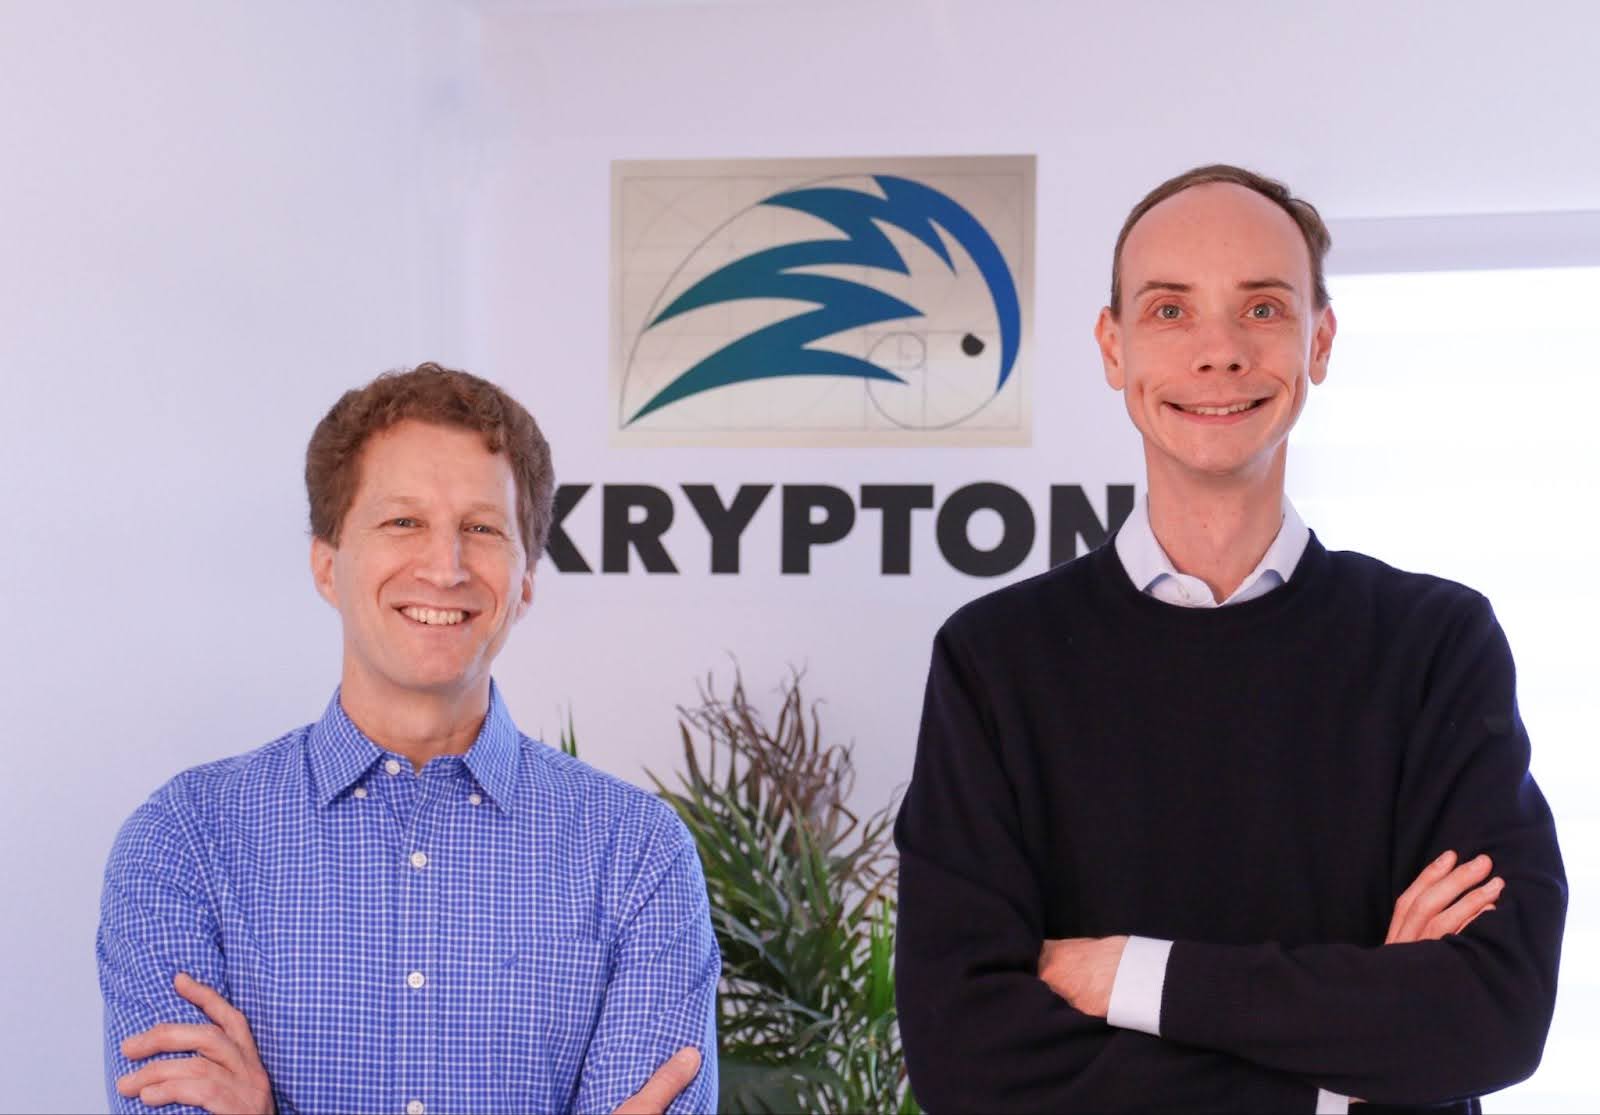 A photo of Krypton's two co-founders.